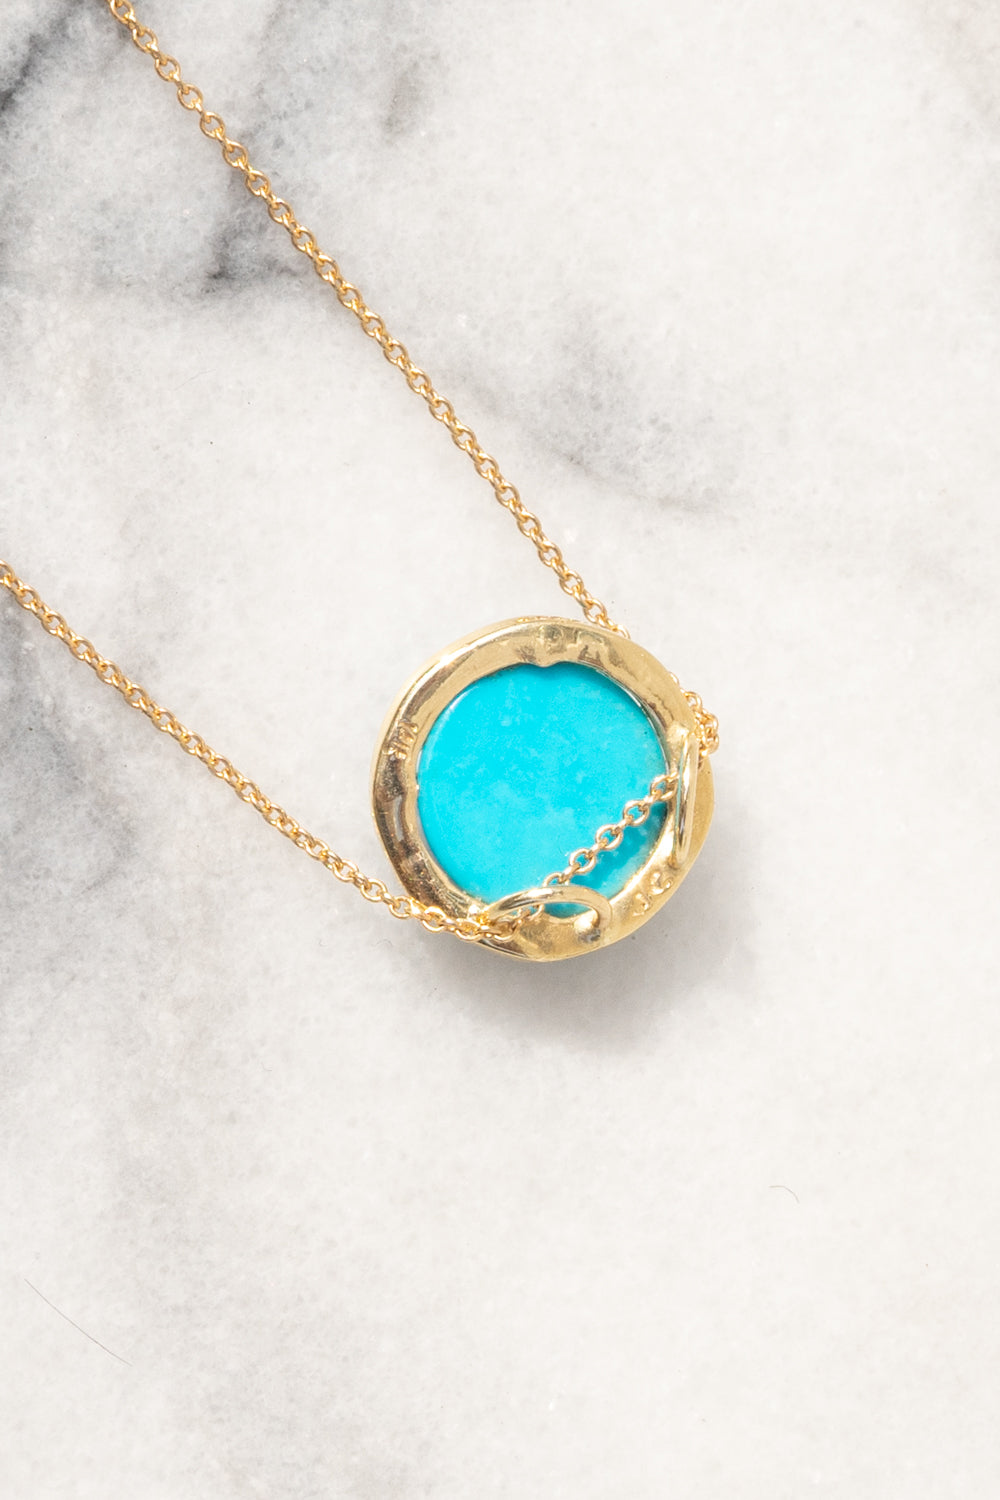 Janna Conner Sleeping Beauty Turquoise Necklace with Diamond Pavé 14K Yellow Gold view from backside